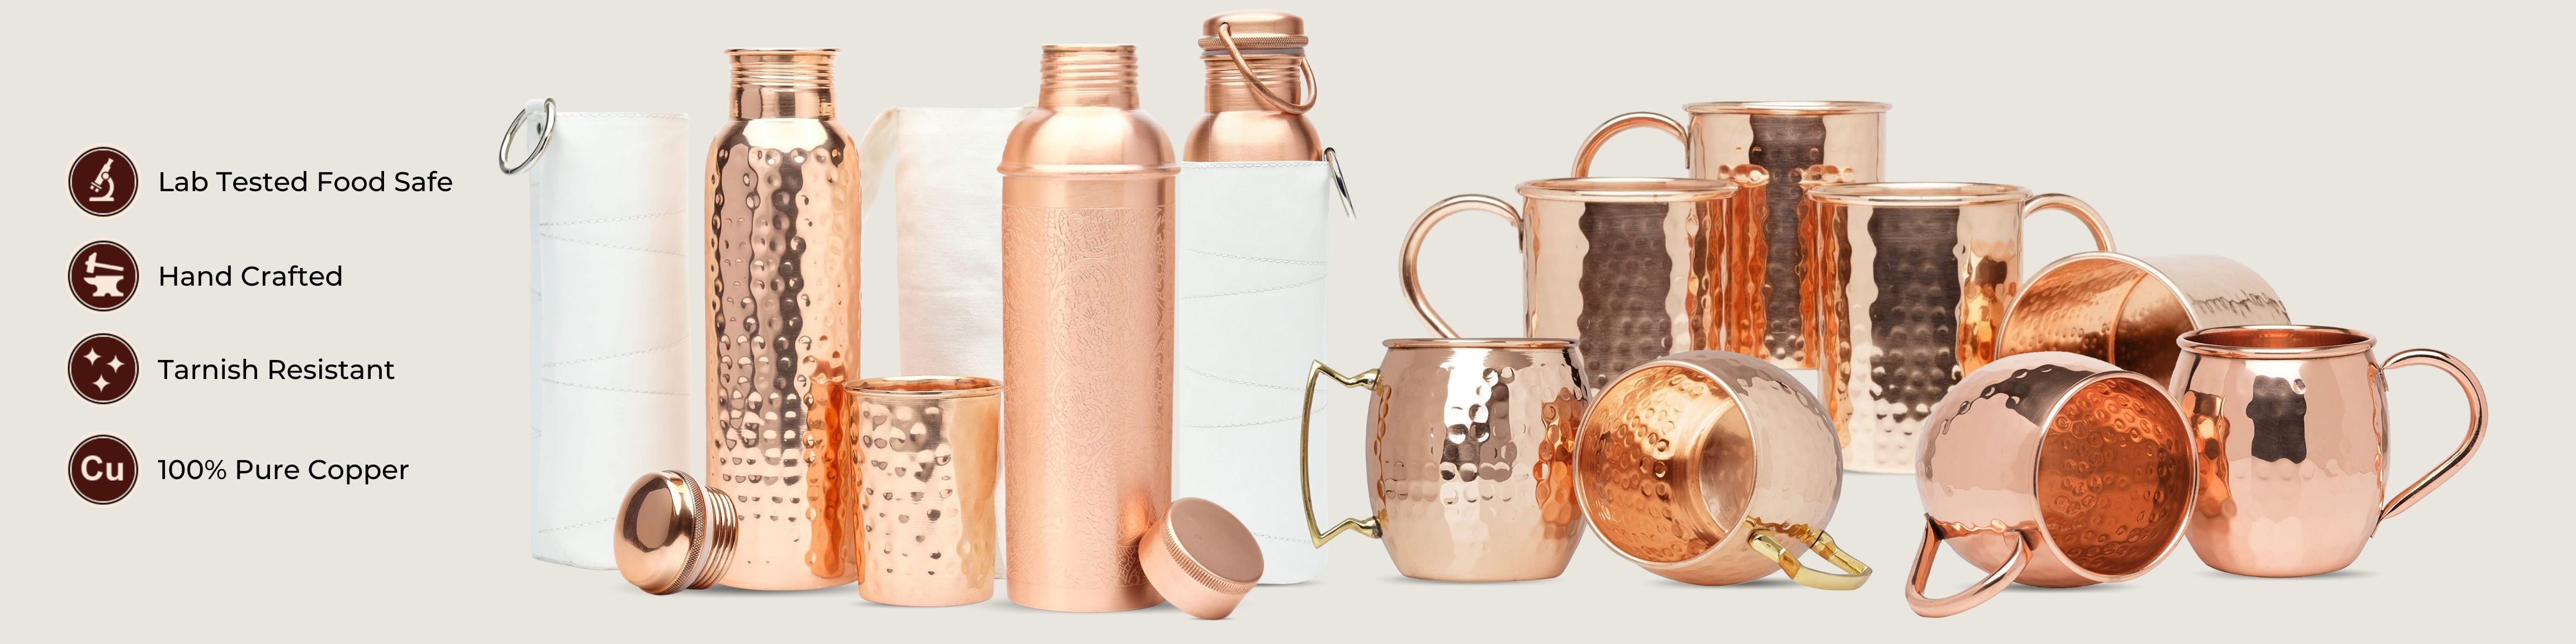 Wholesale Copper Mugs and Copper Bottles | Perfect for wedding gift | Corporate Gift Ideas | Bulk Purchase